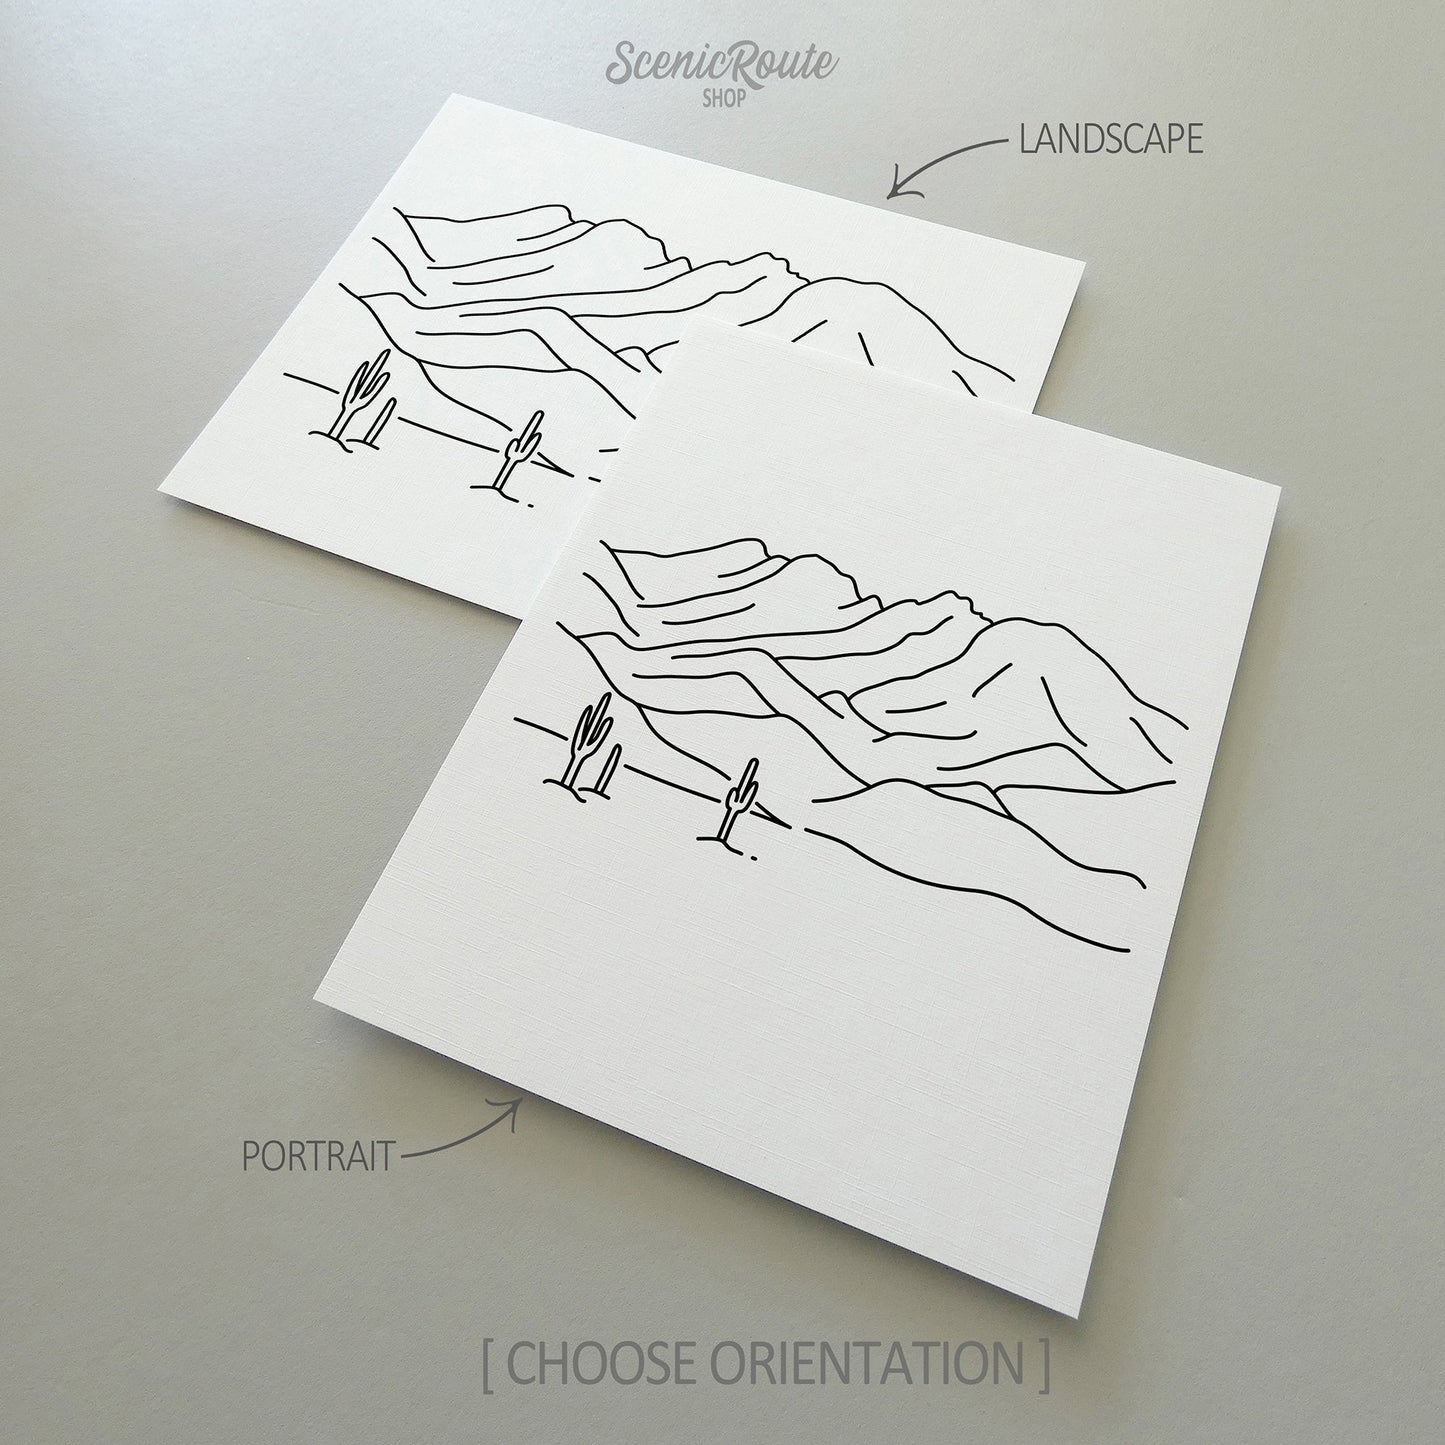 Two line art drawings of Four Peaks Mountains on white linen paper with a gray background.  The pieces are shown in portrait and landscape orientation for the available art print options.